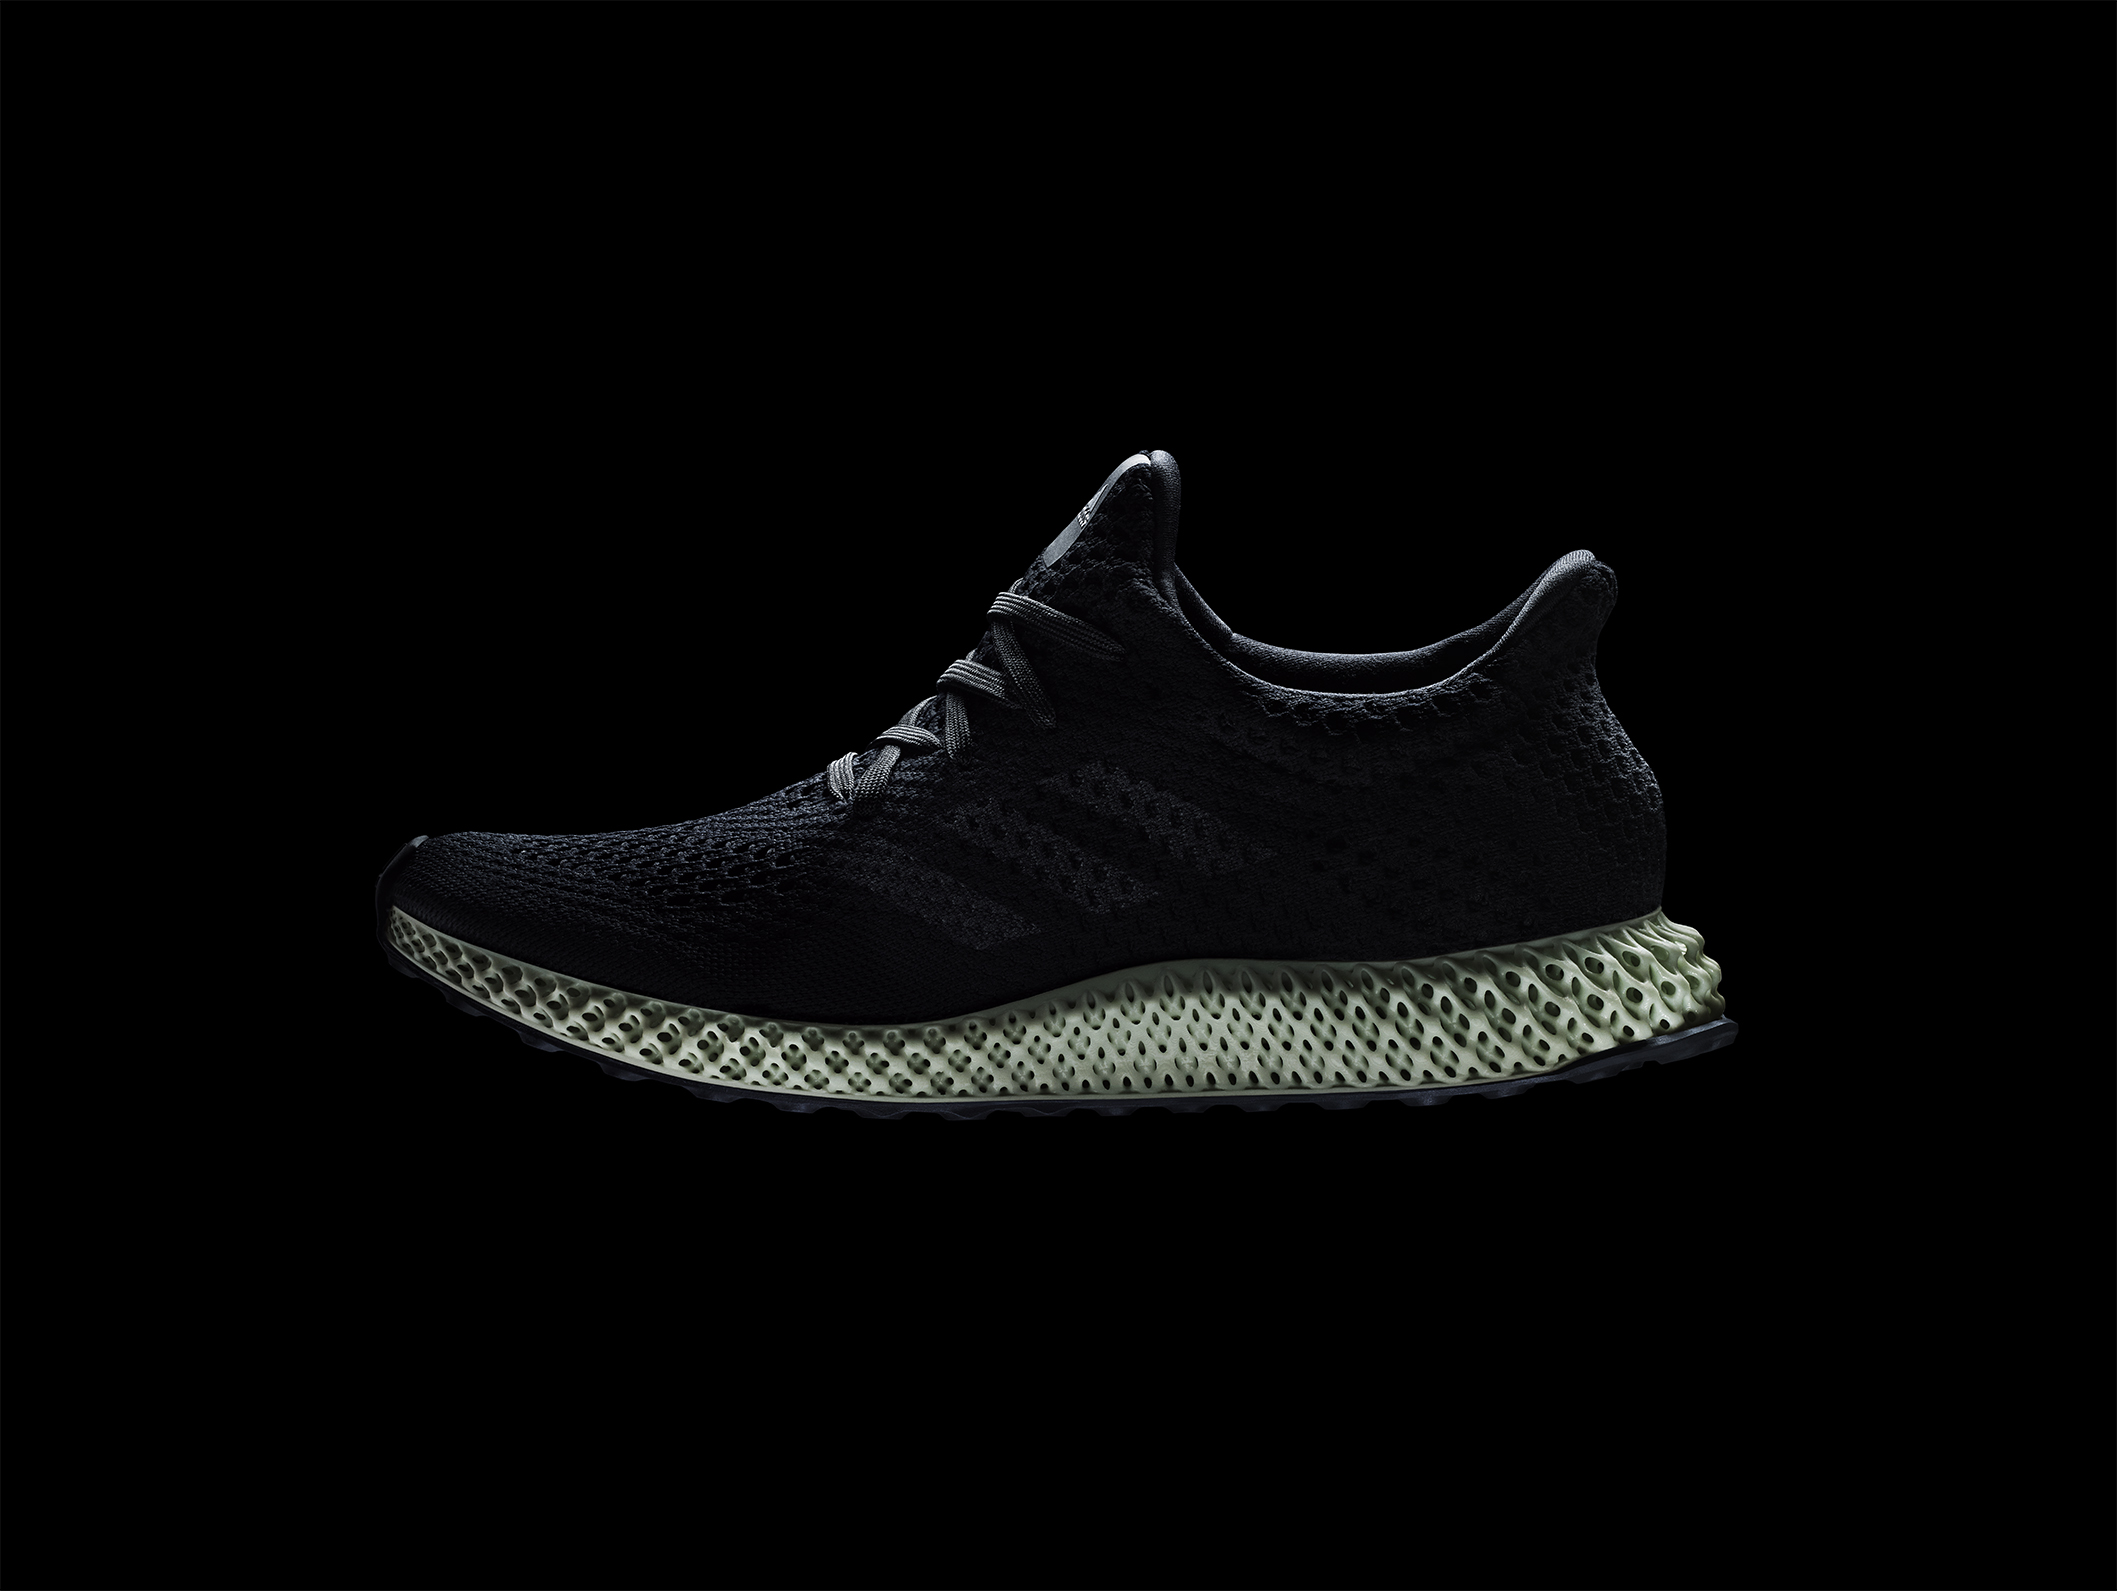 adidas unveils limited edition 3d printed running shoes